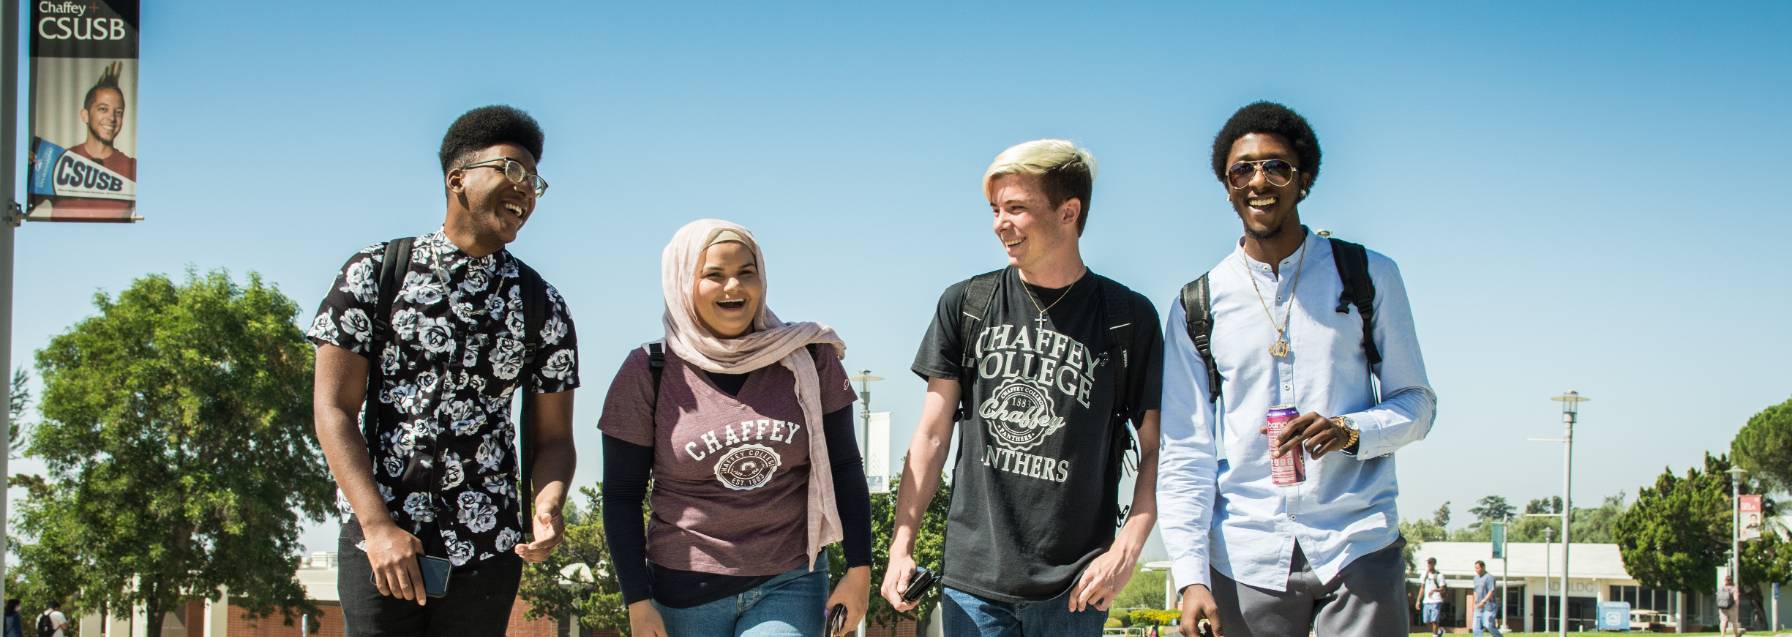 four students walking on campus